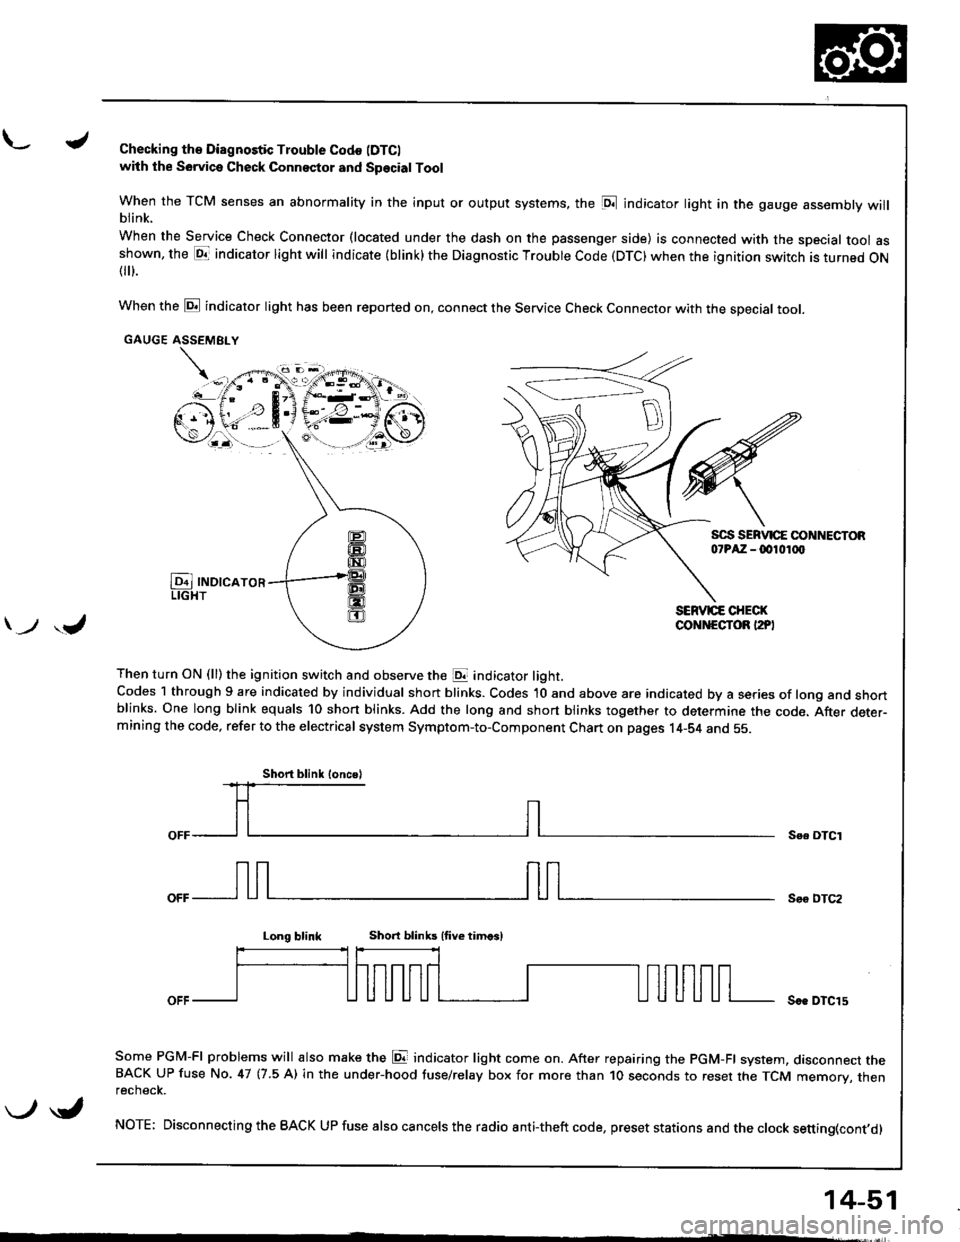 ACURA INTEGRA 1998  Service Repair Manual L./Checking th€ Diagnostic Trouble Codo (DTC)
with the Sowica Check Connector and Special Tool
When the TCM senses an abnormality in the input or output systems, the [D;l indicator light in the gaug